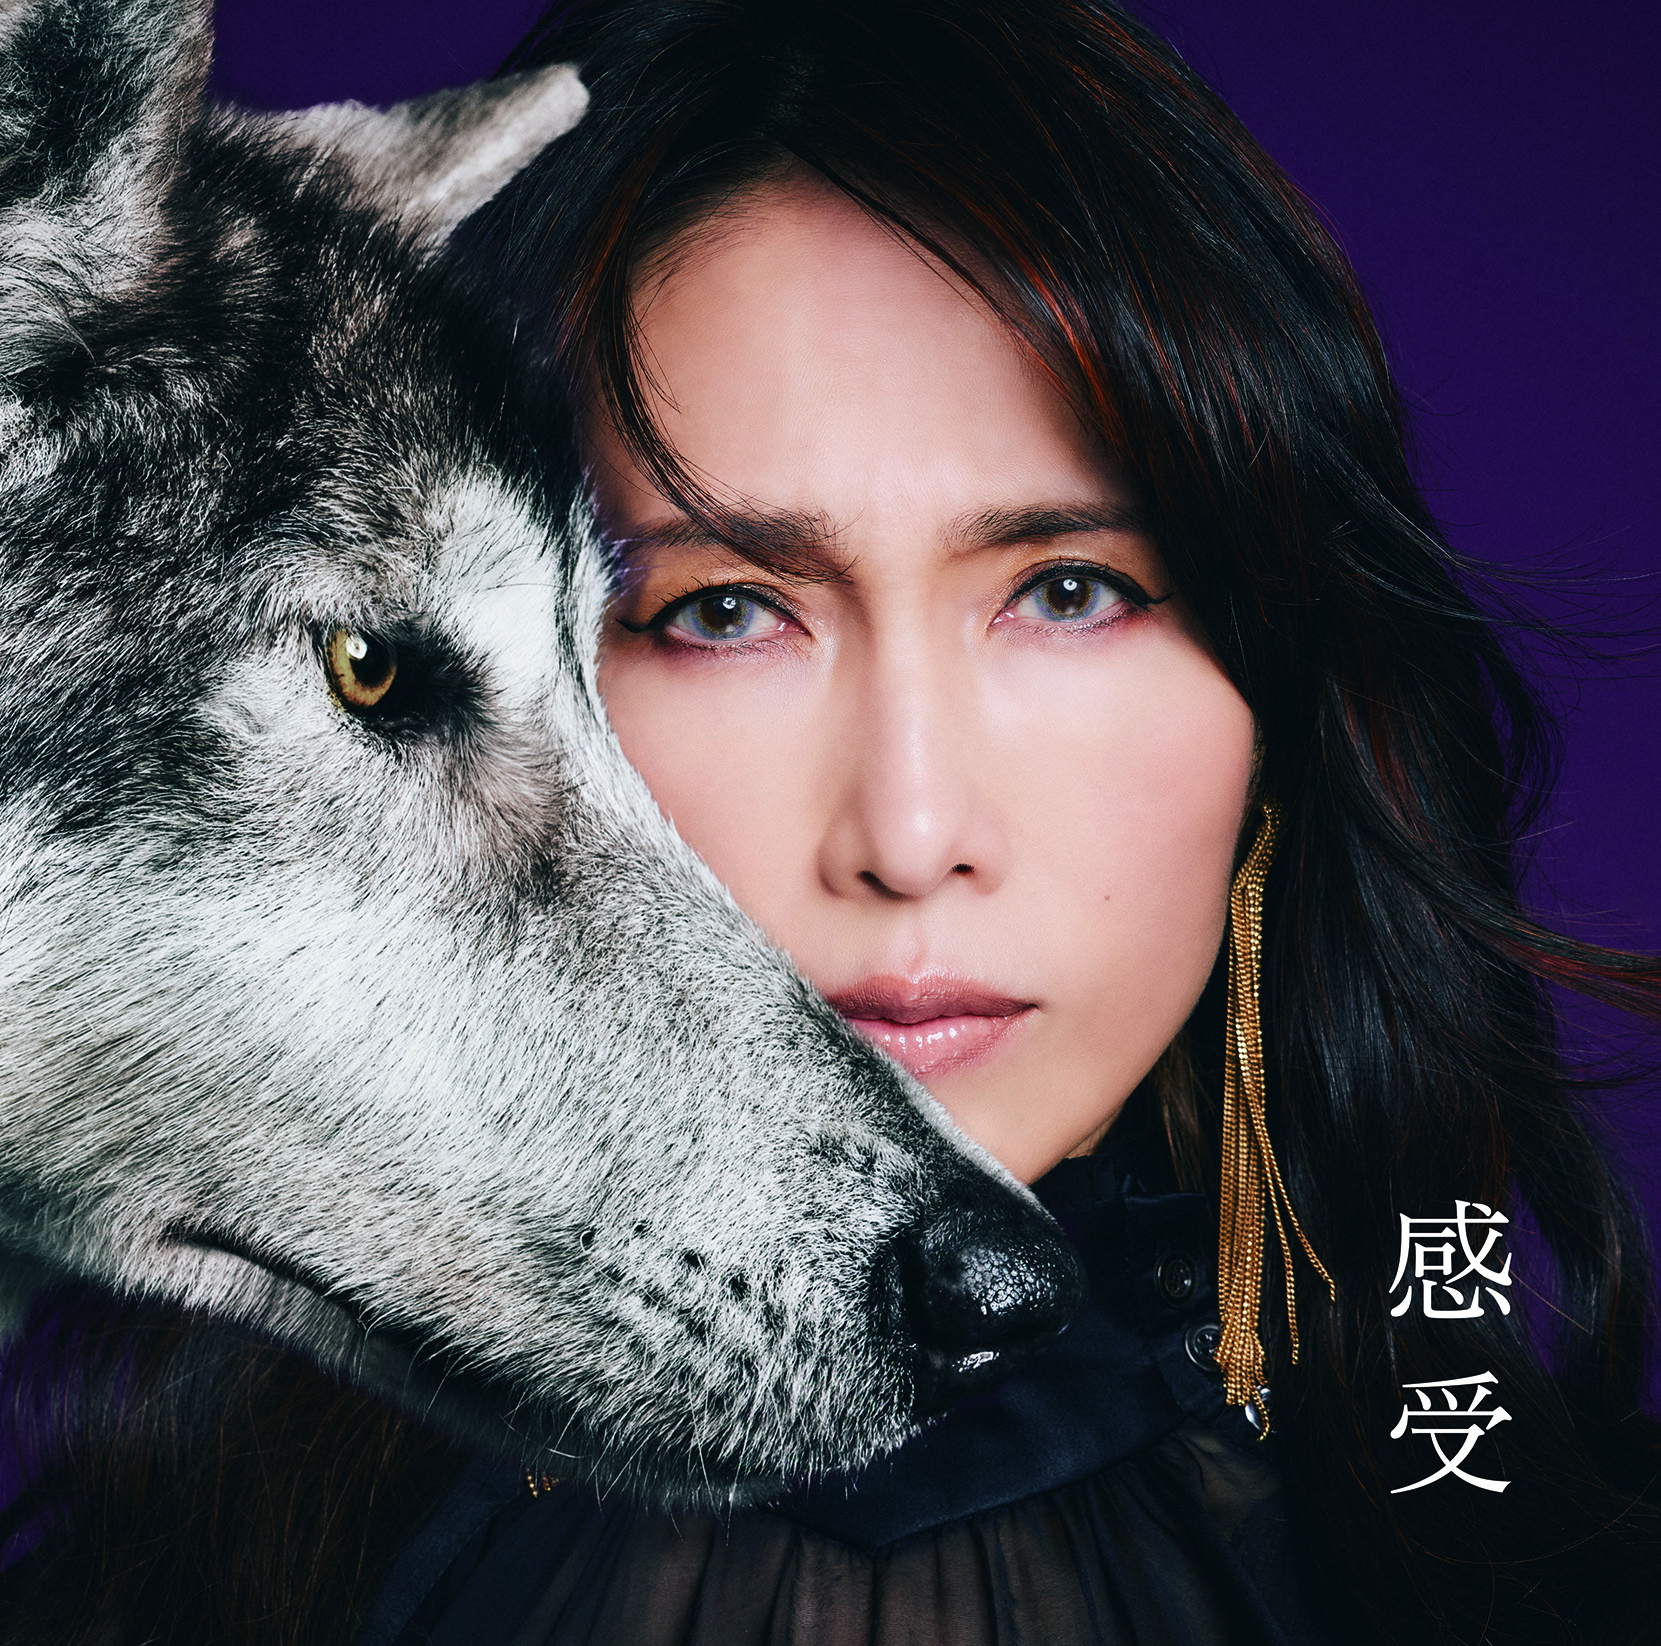 Shizuka Kudo Self-cover Album "Kanjyu" Normal Version (CD Only) Celebrating 35th Anniversary of debut Release on July 20th,2022